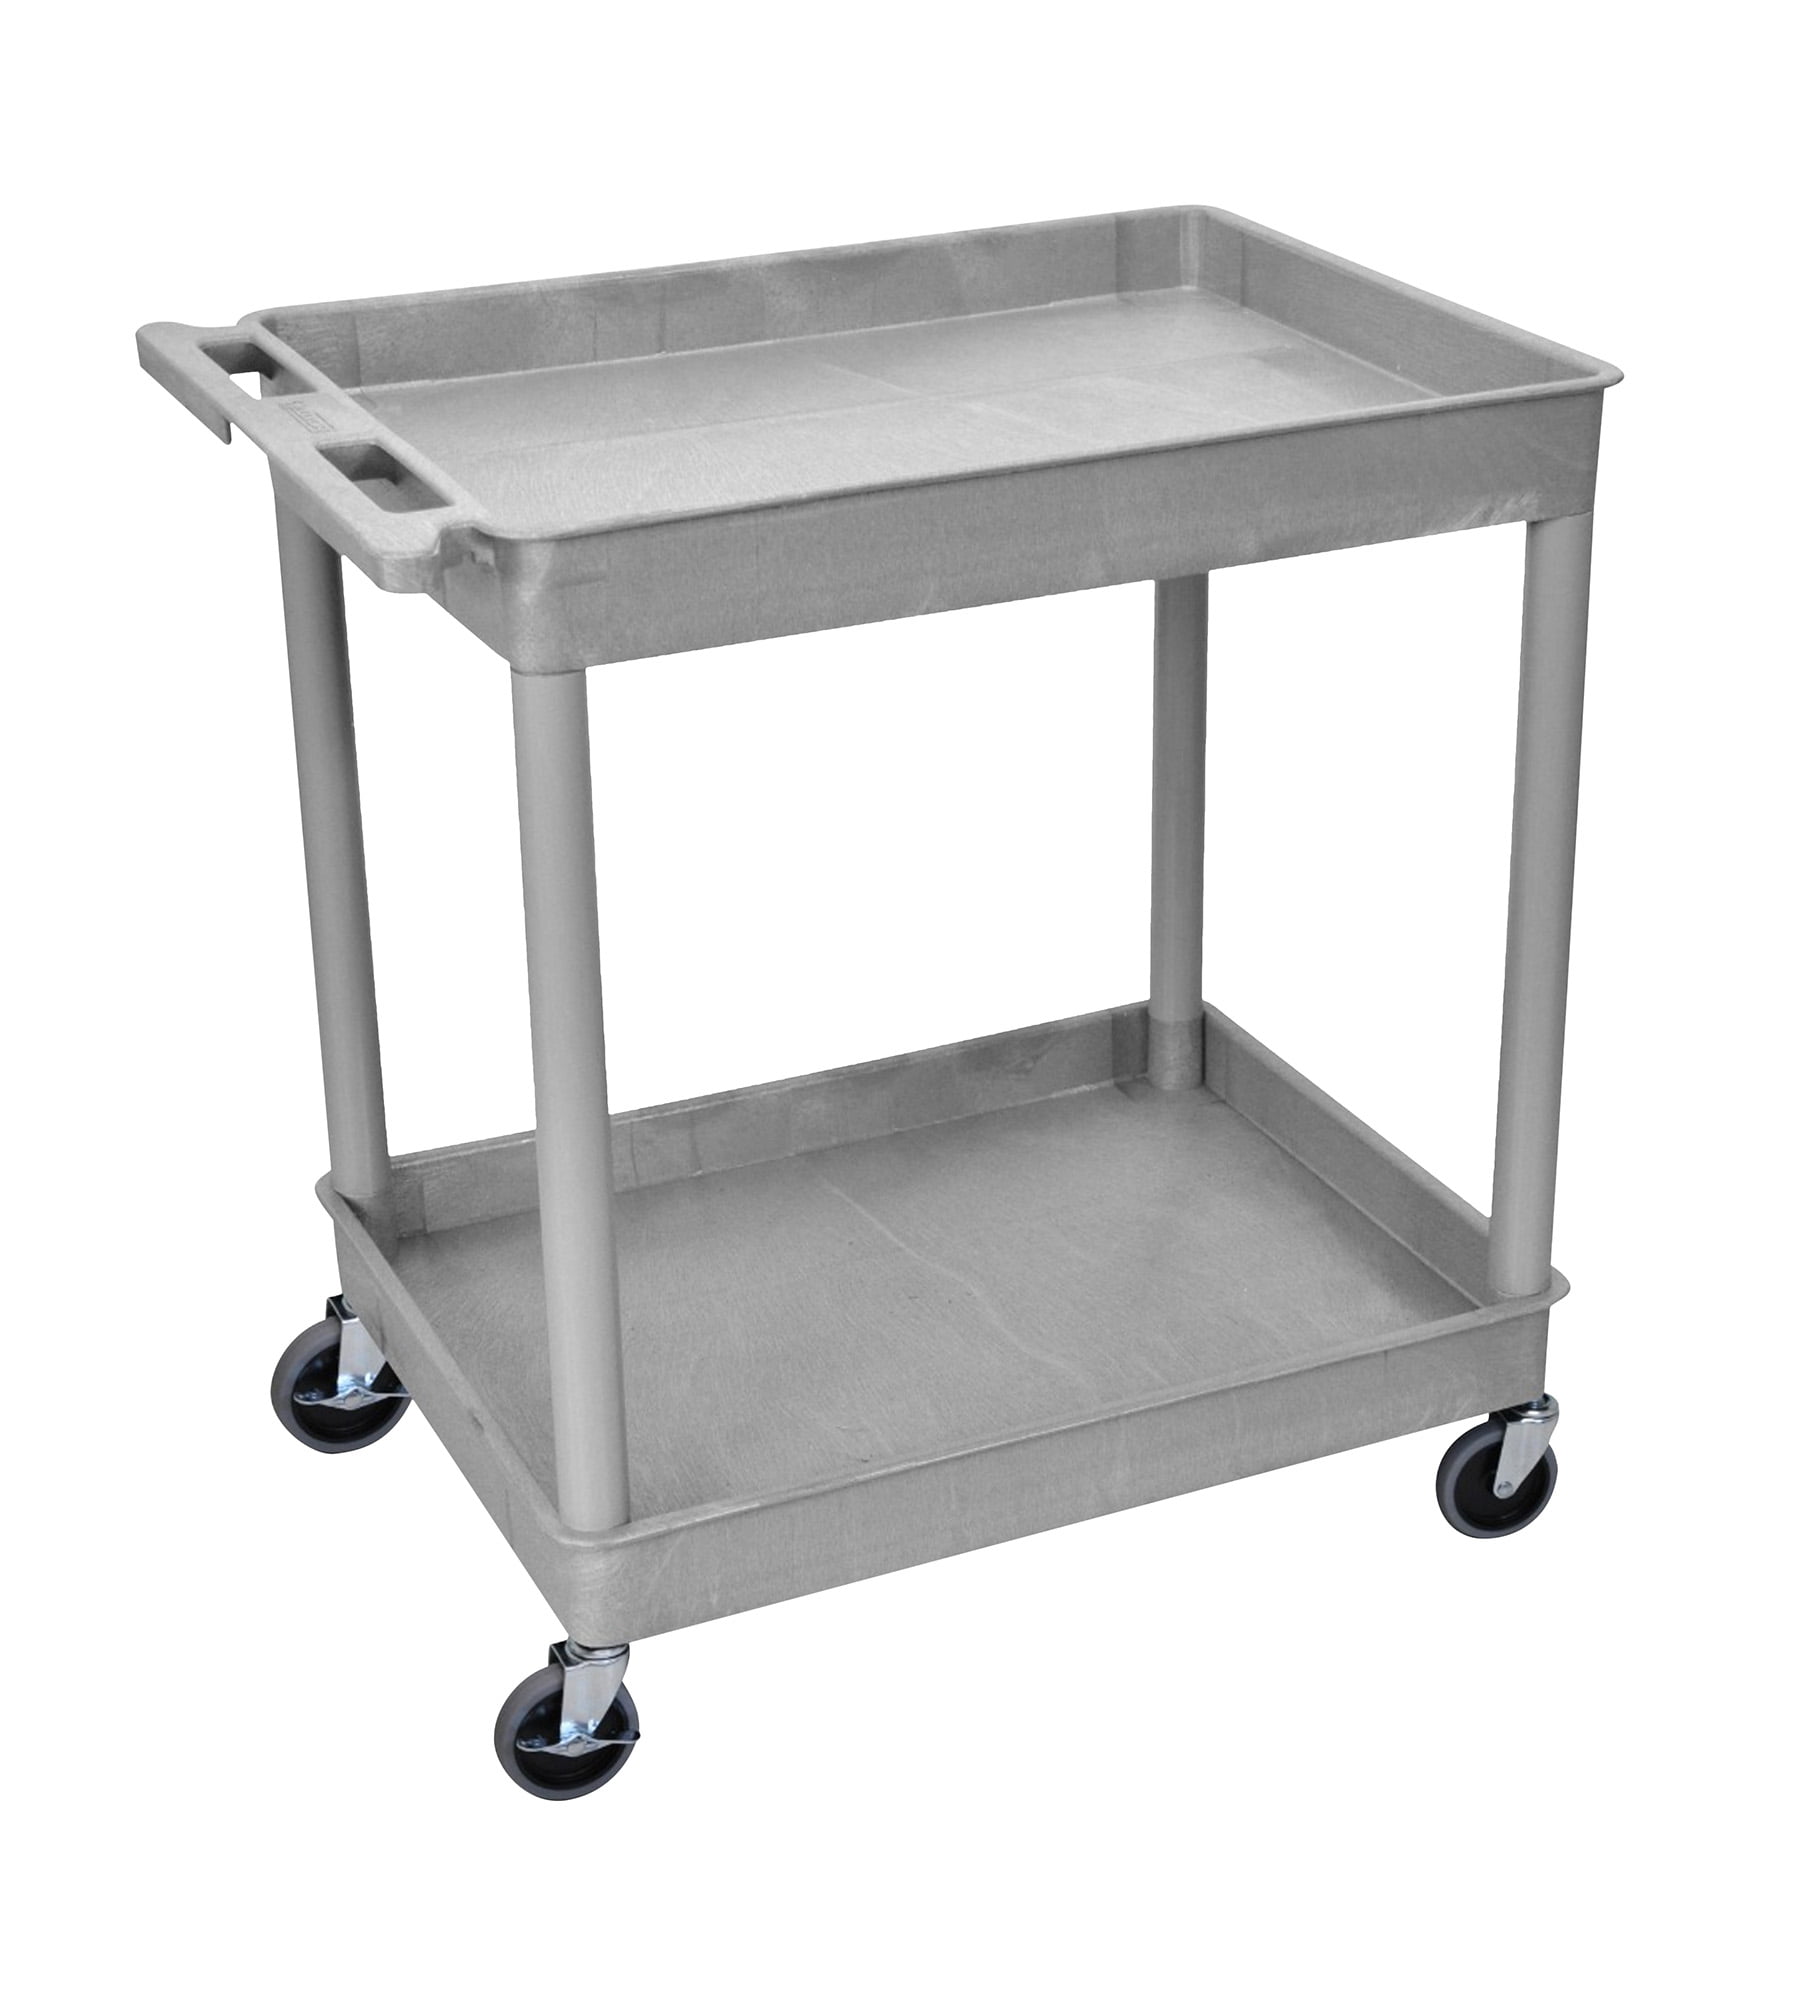 BISupplyRolling Cart with Shelves Rolling Tool Cart Service Cart Plastic 